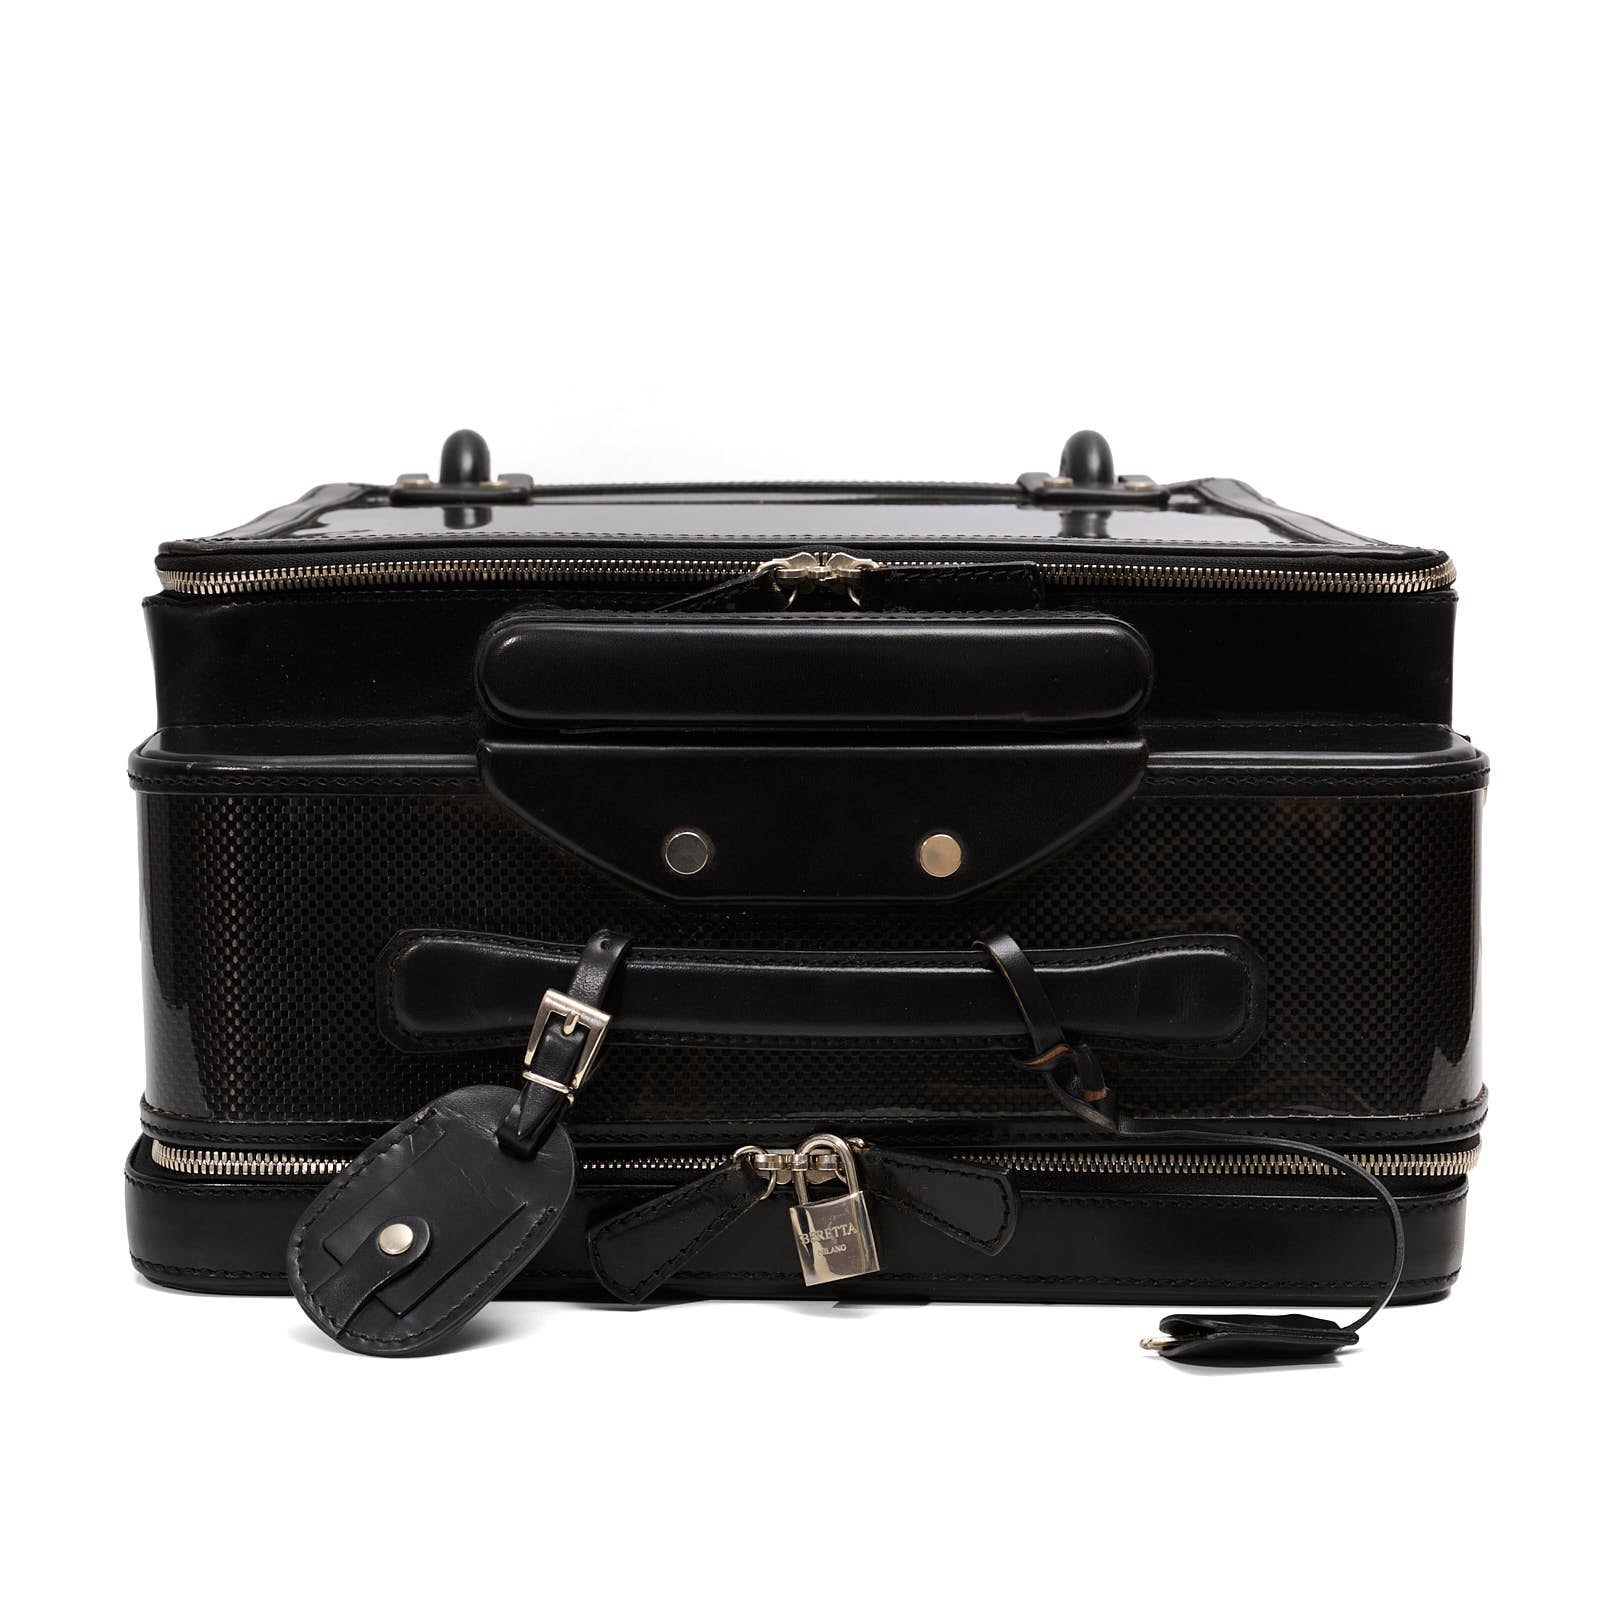 ALFREDO BERETTA Carbon Fiber-Leather Black Trolley Carry-On Suitcase NEW